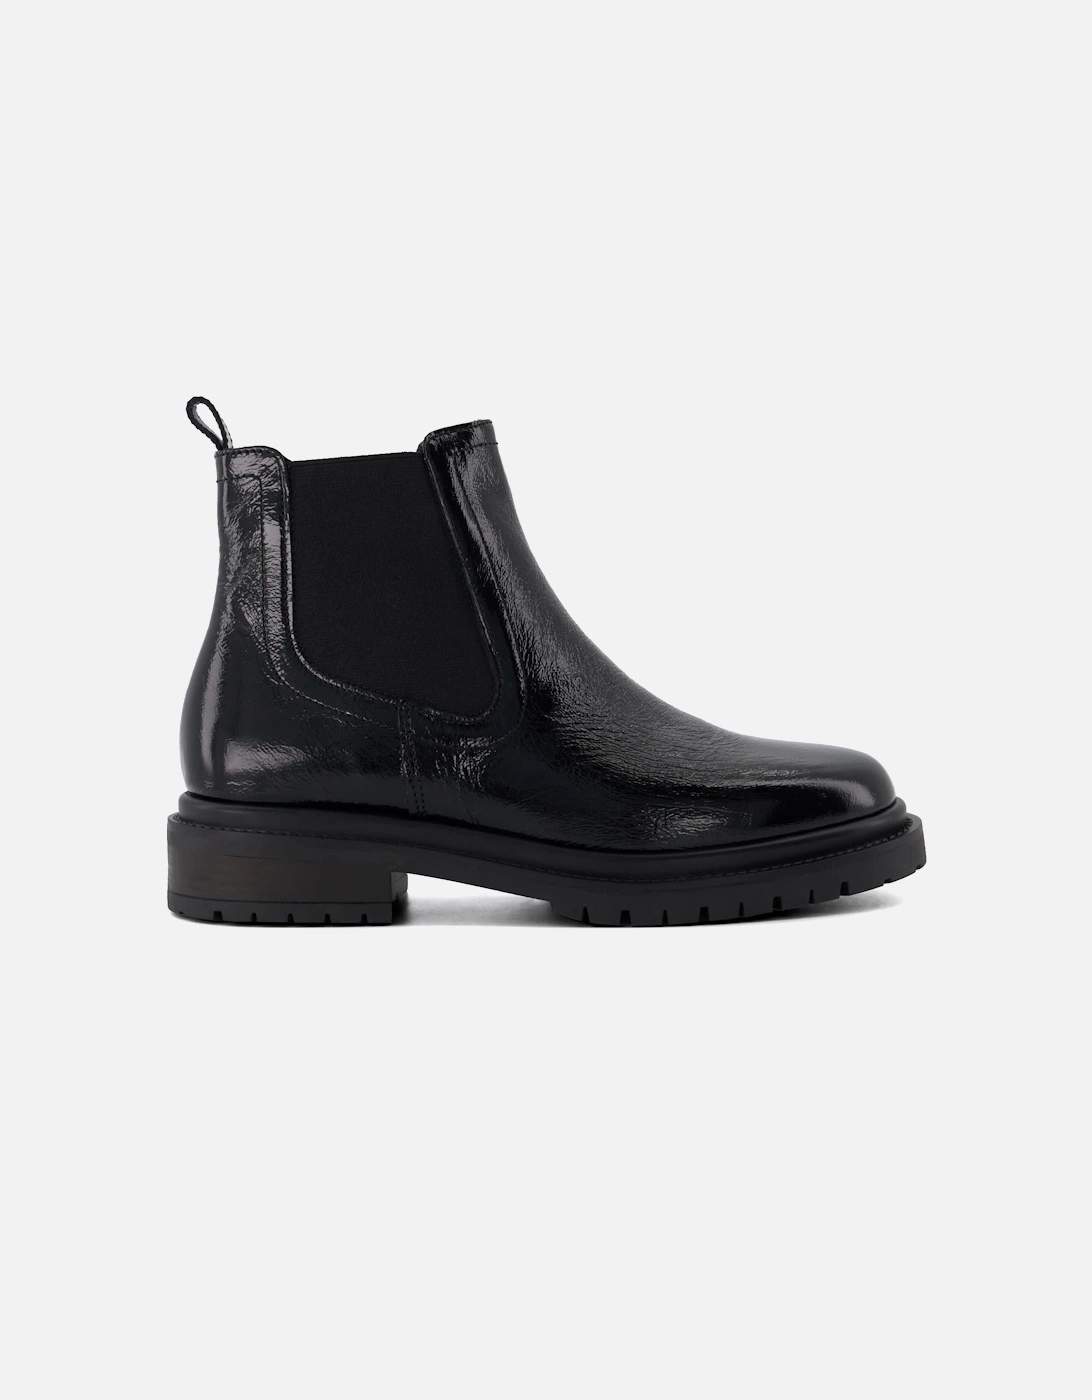 Ladies Perceive - Cleated Casual Chelsea Boots